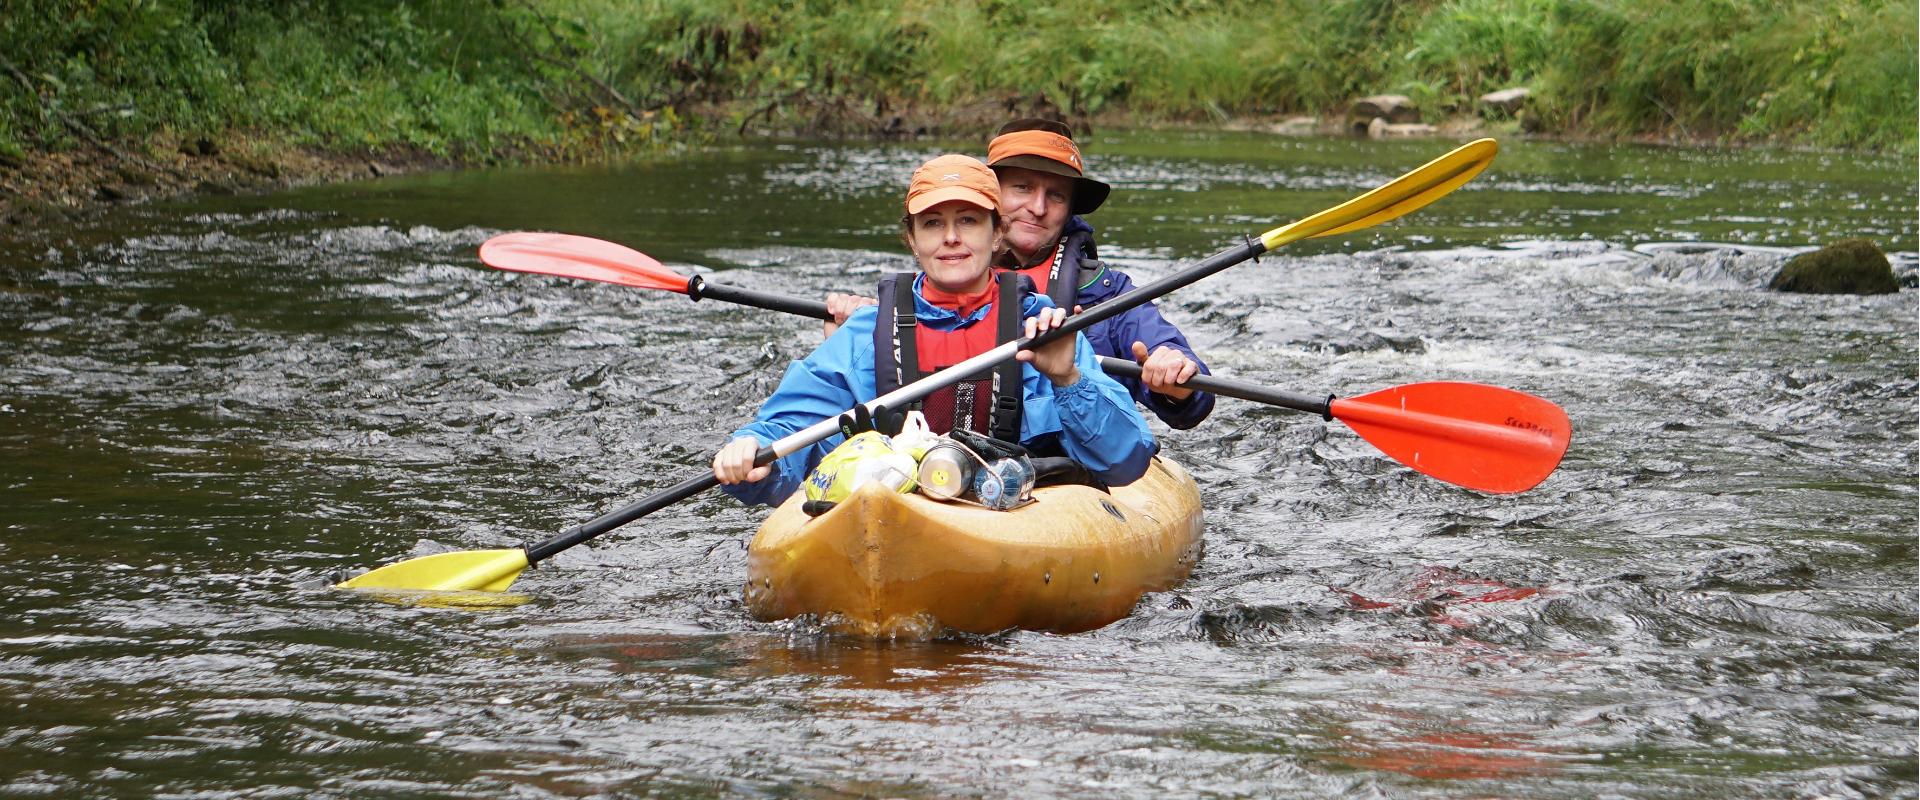 Canoeing on the border of the European Union